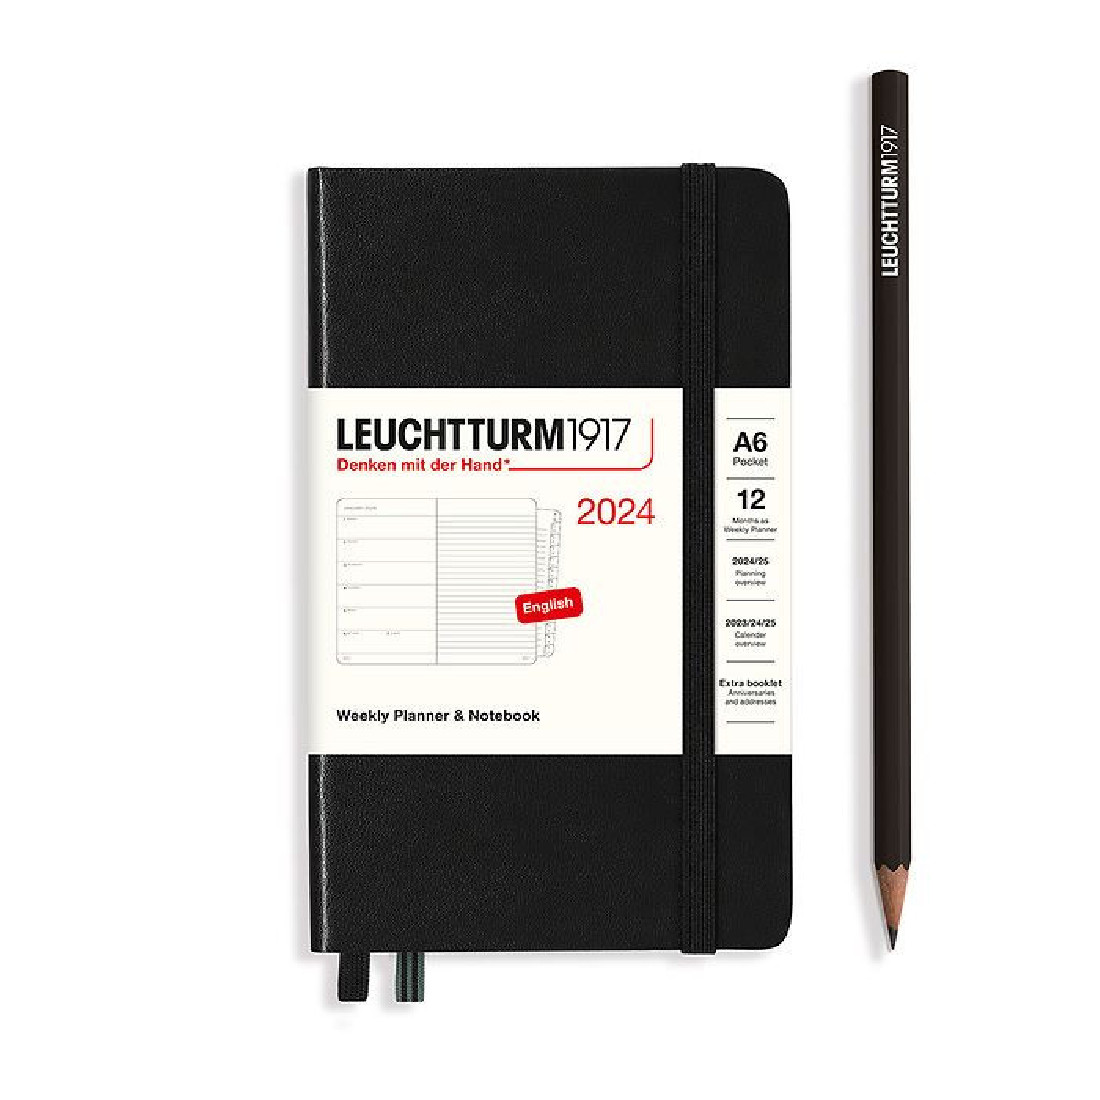 Leuchtturm 1917 Weekly Planner and Notebook 2024 Black Pocket A6 Hard Cover